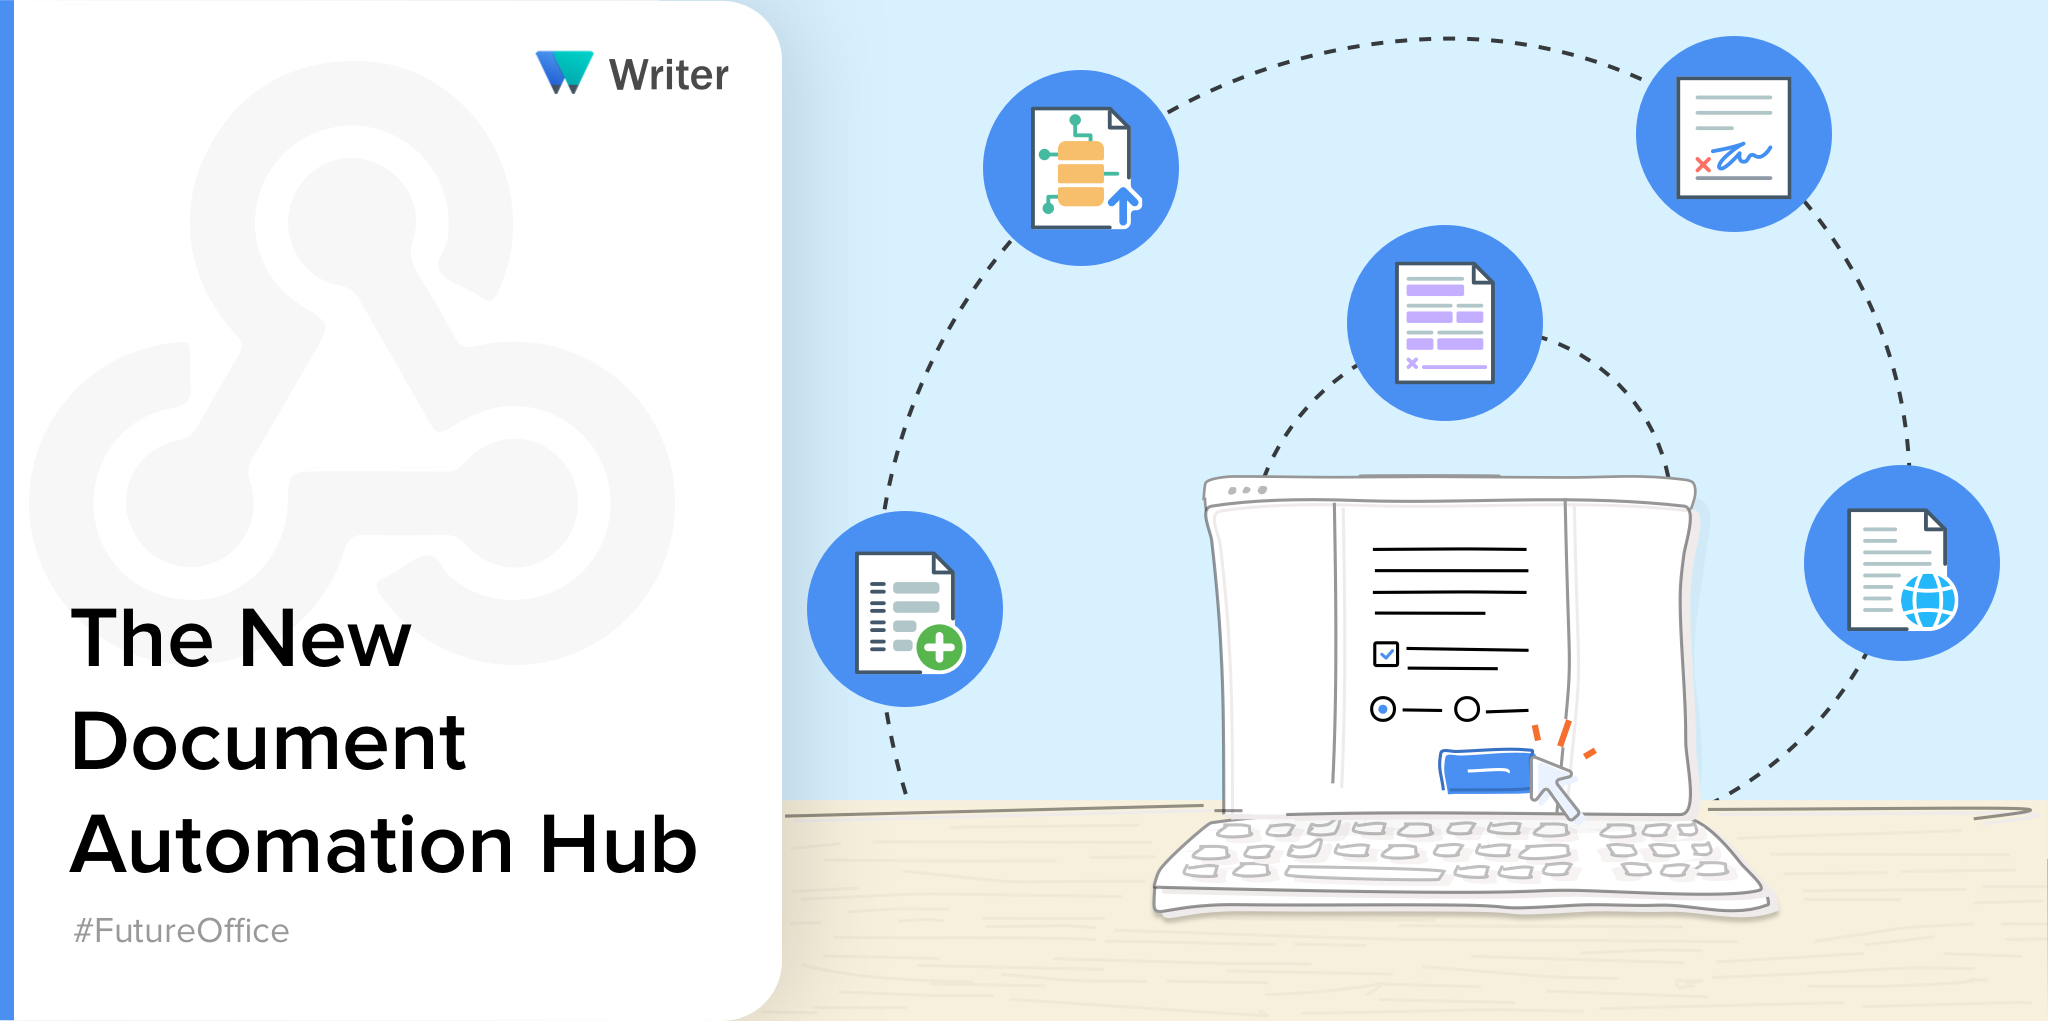 Optimize your paperwork digitally—introducing the all-new automation hub in Writer.